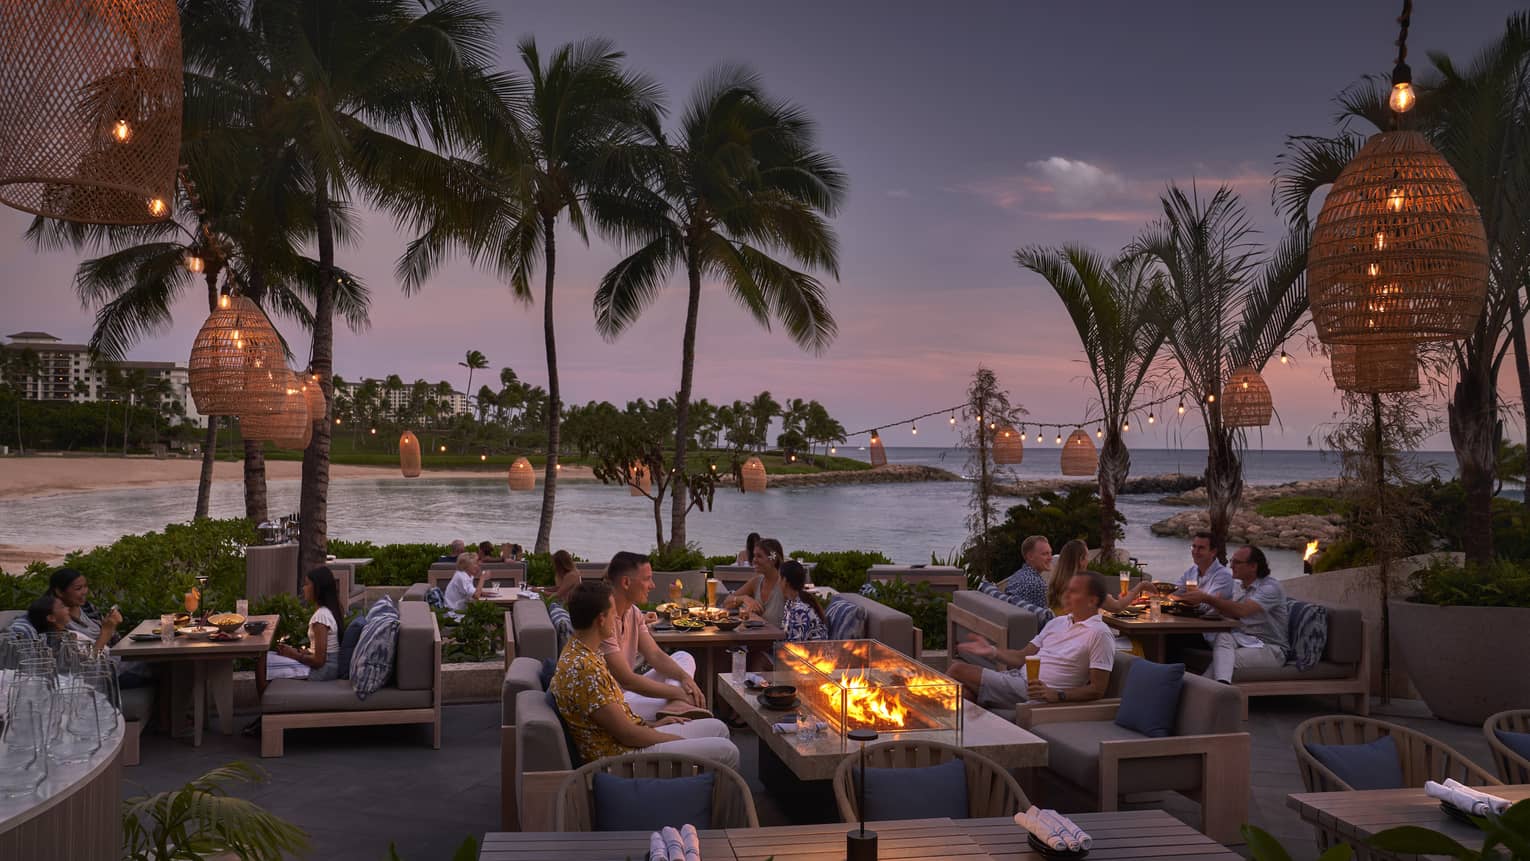 People mingling on outdoor, waterfront terrace in tropical location at night